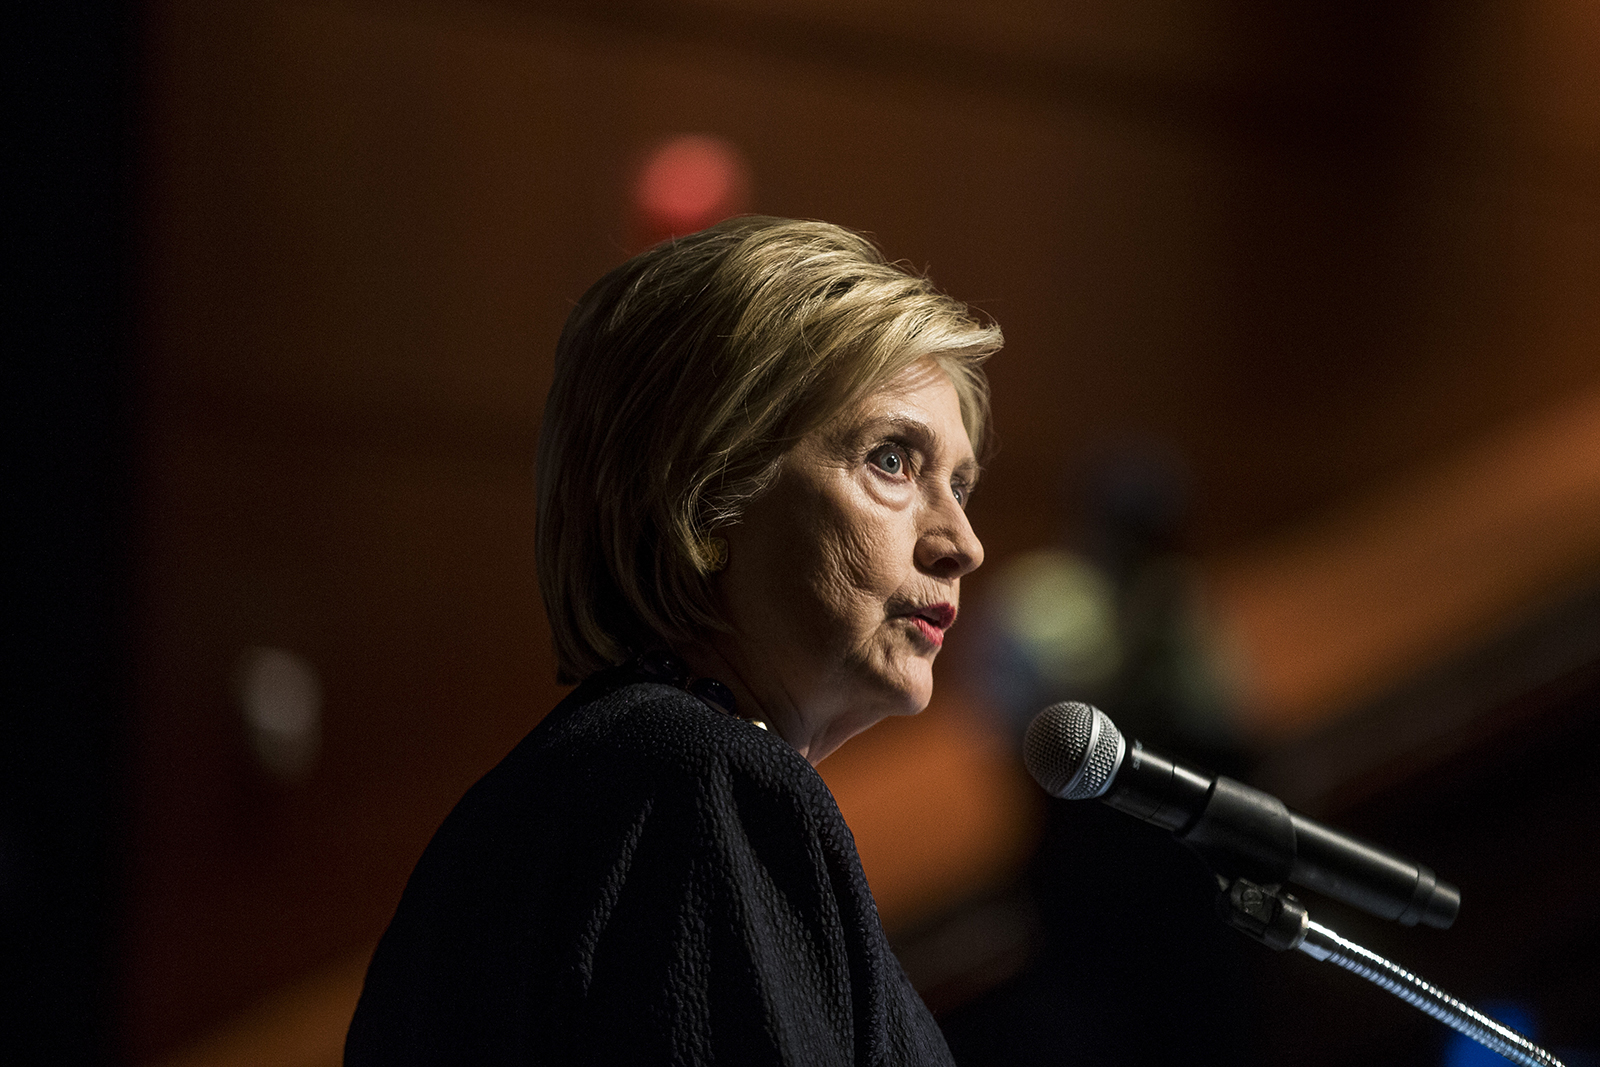 Former Secretary of State Hillary Clinton delivers a keynote speech during the American Federation of Teachers Shanker Institute Defense of Democracy Forum at George Washington University on September 17, 2019 in Washington, DC.